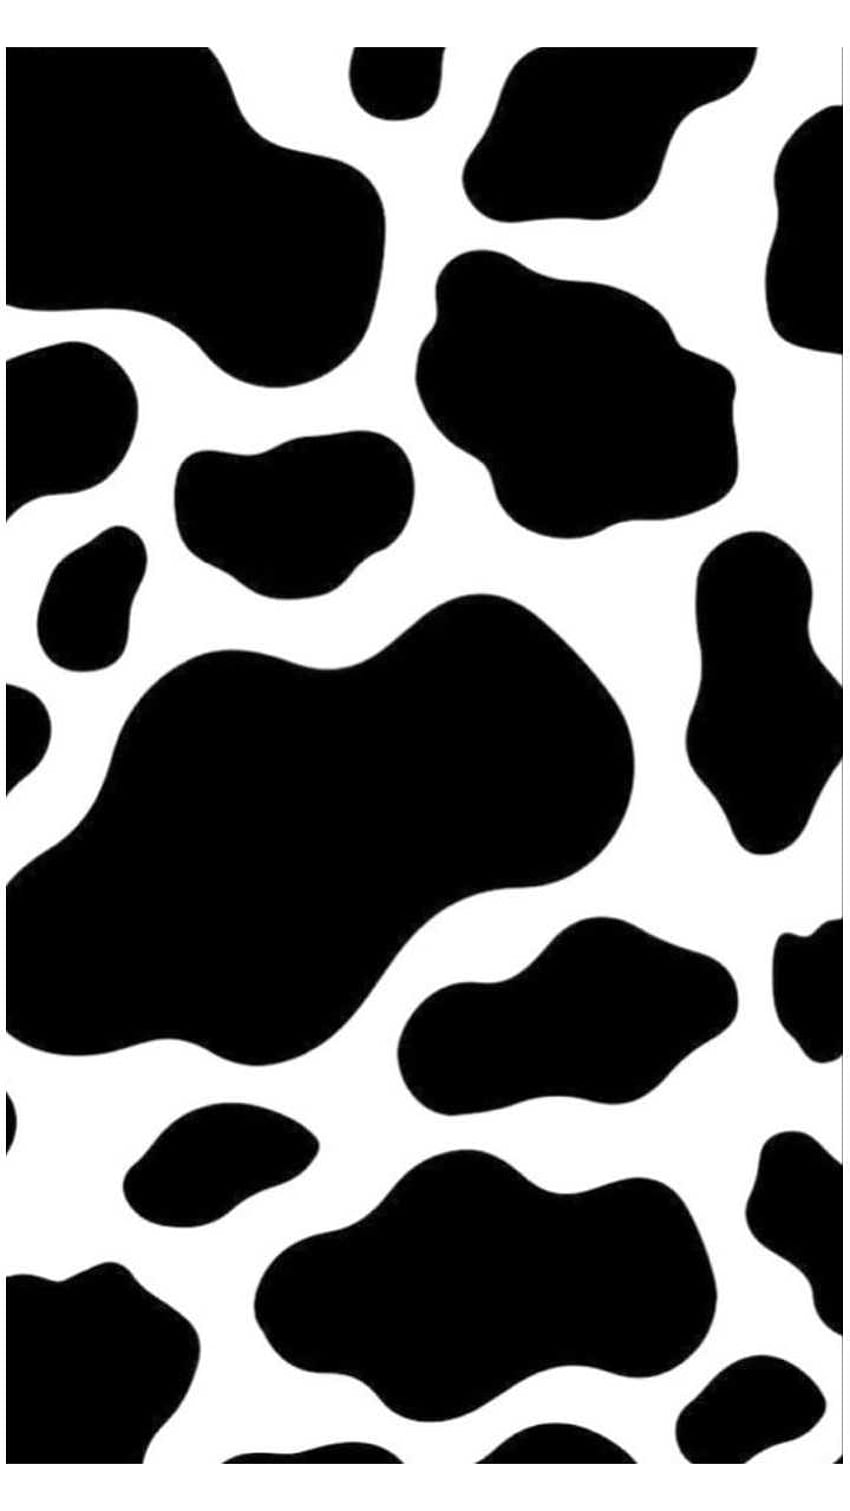 IPhone Cow Print - Awesome HD phone wallpaper | Pxfuel